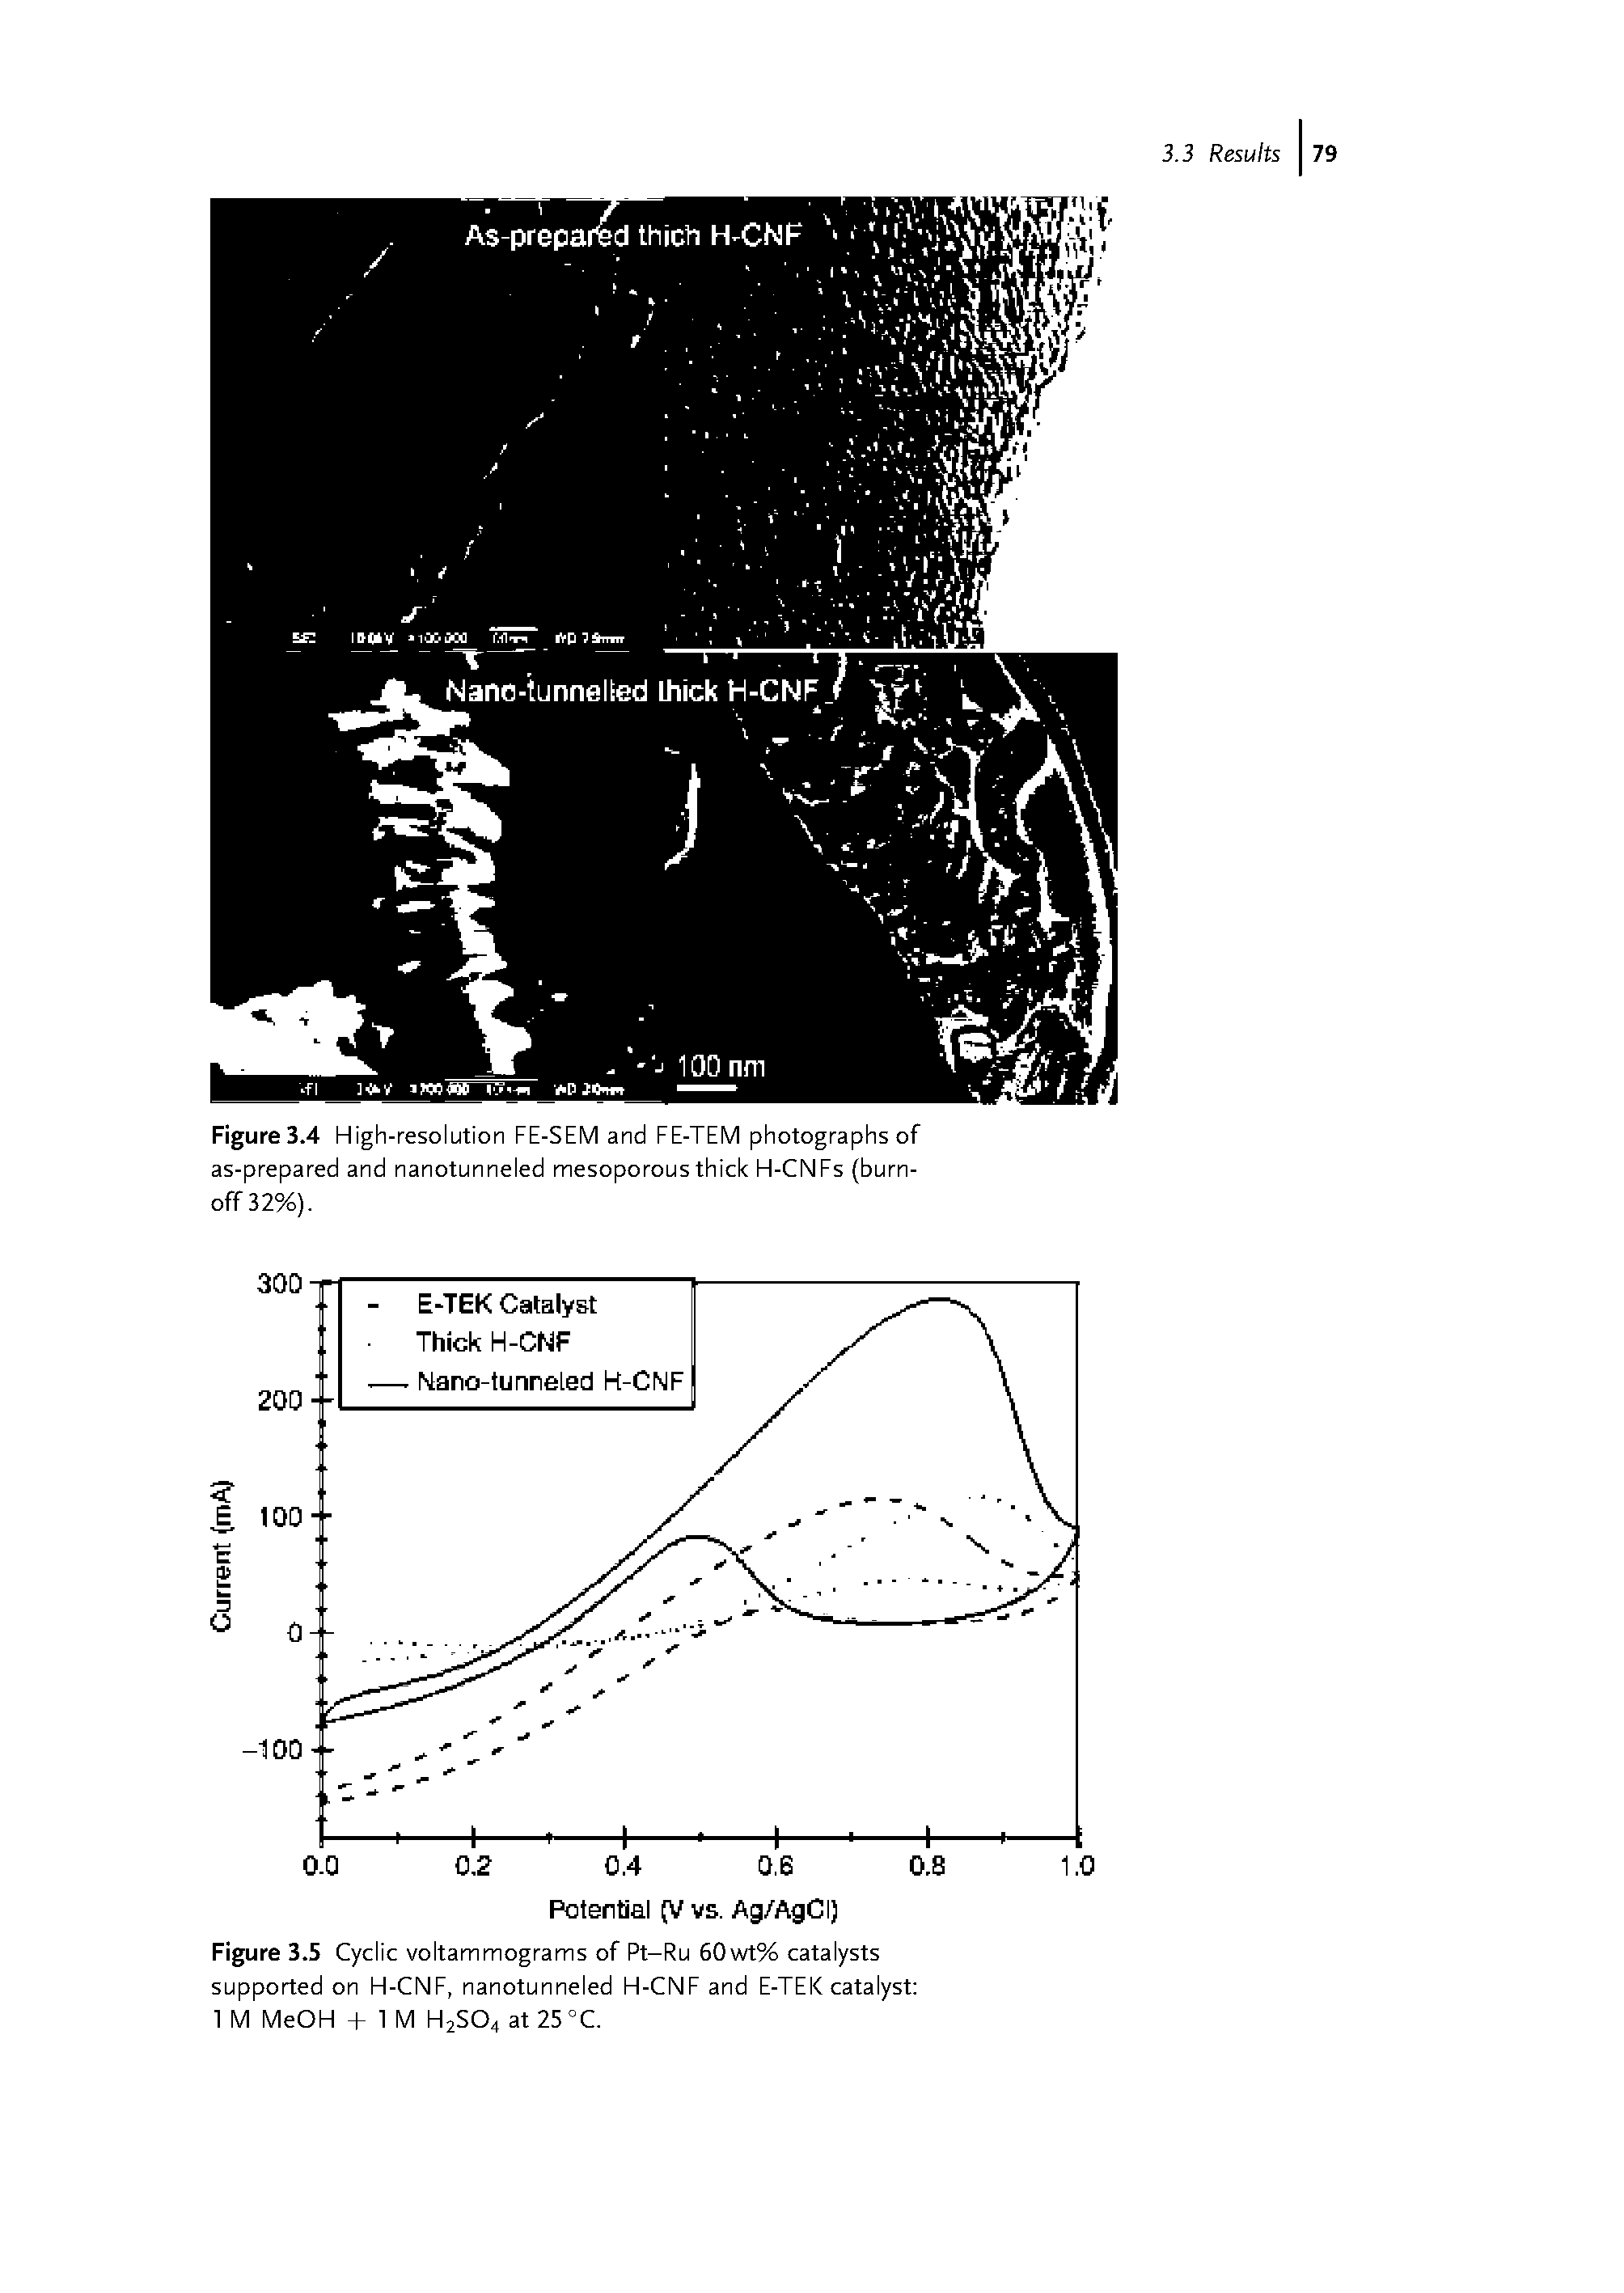 Figure 3.4 High-resolution FE-SEM and FE-TEM photographs of as-prepared and nanotunneled mesoporousthick H-CNFs (burn-off 32%).